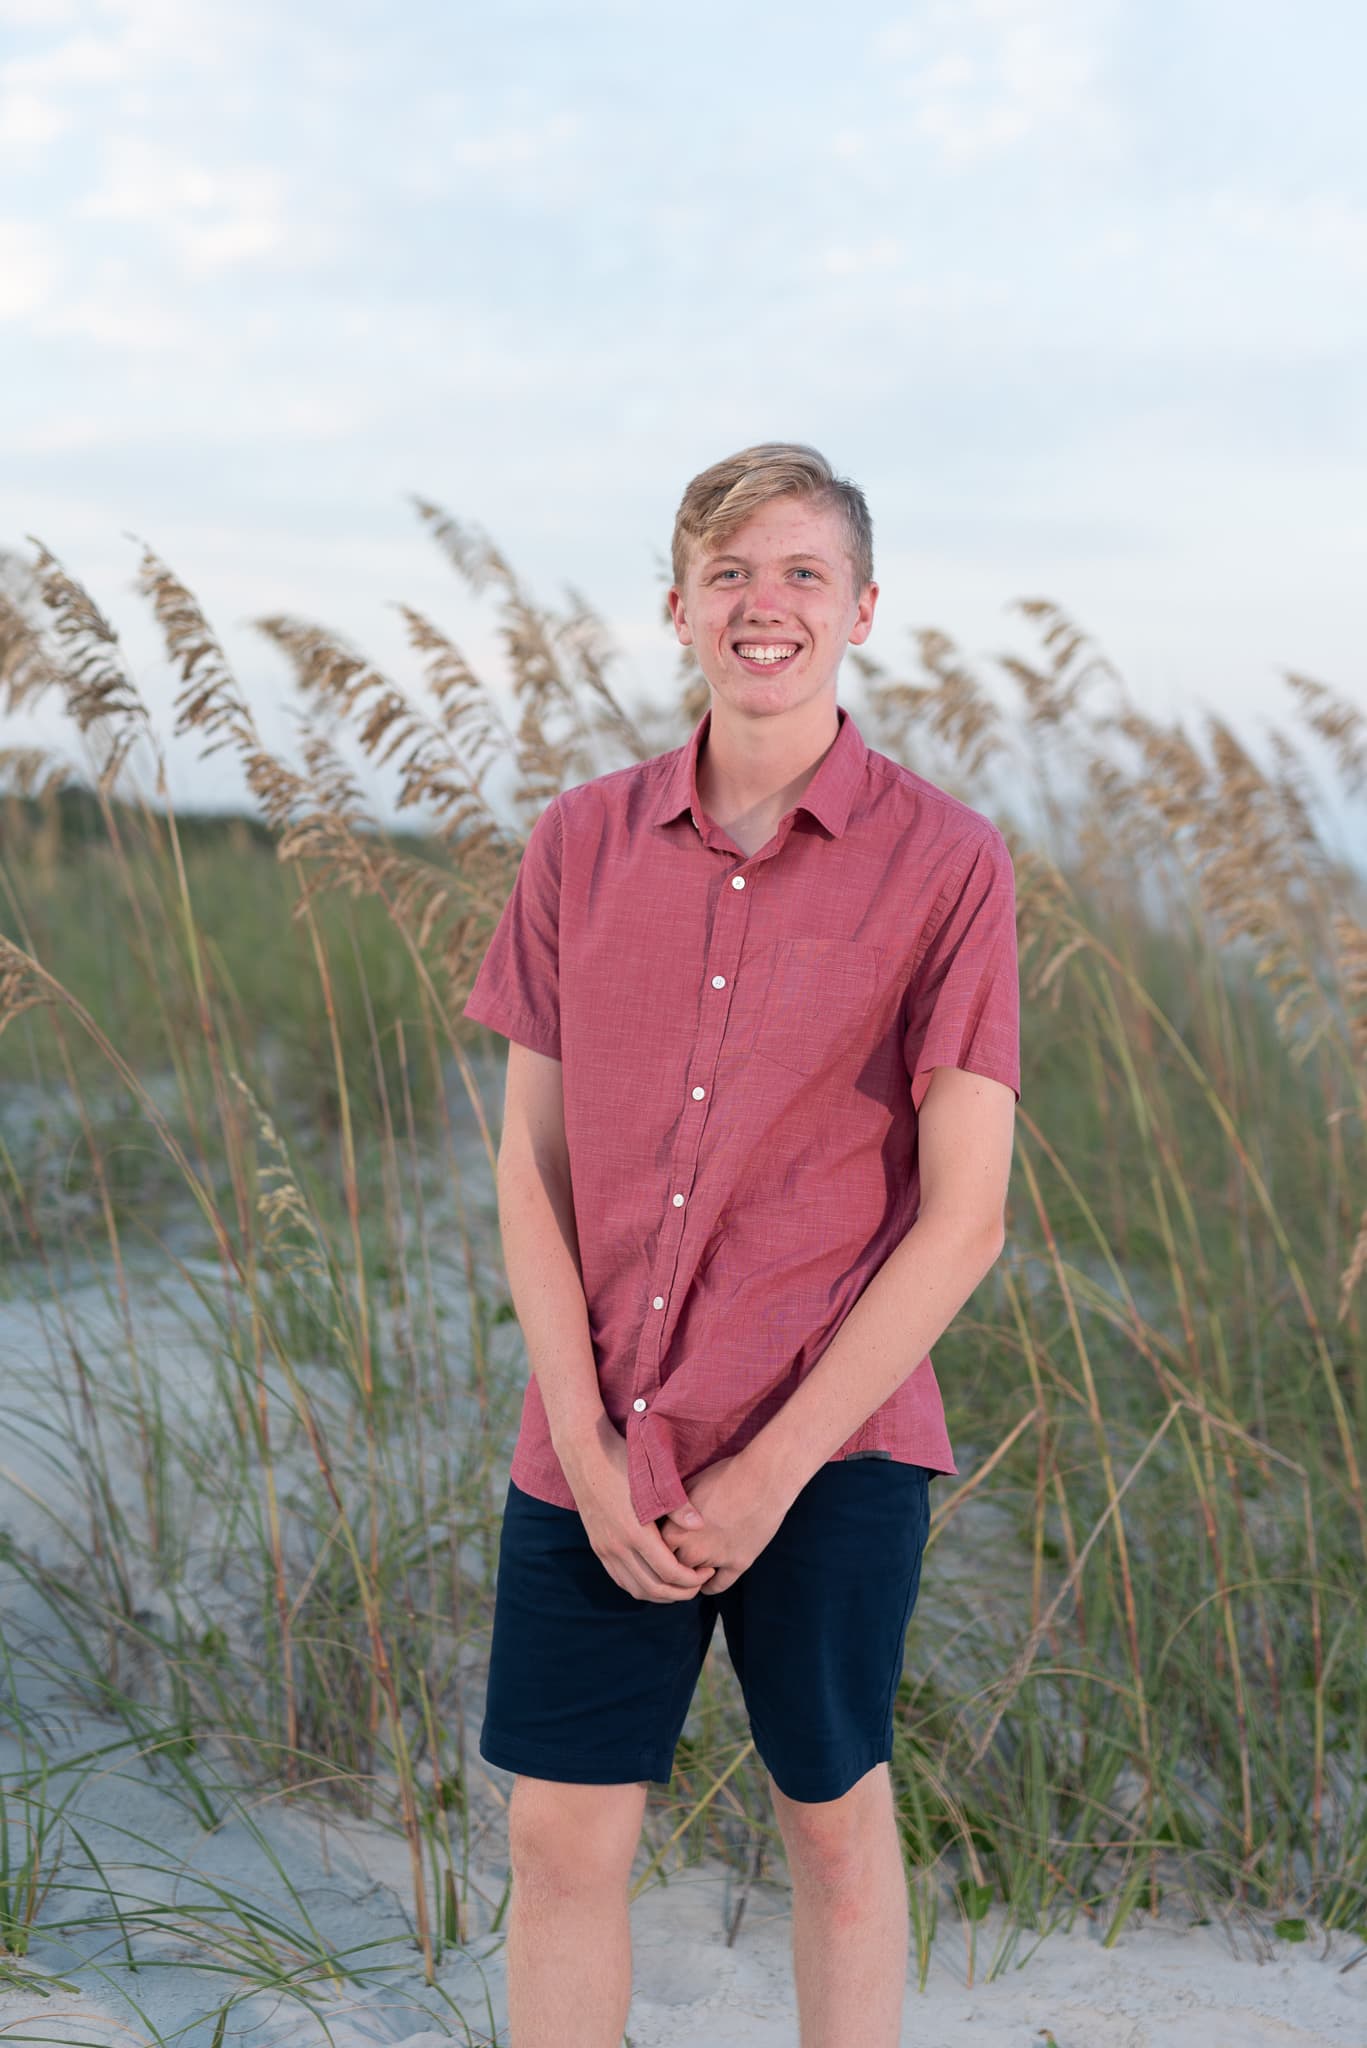 Portraits of the kids in front of the sea oats - Huntington Beach State Park